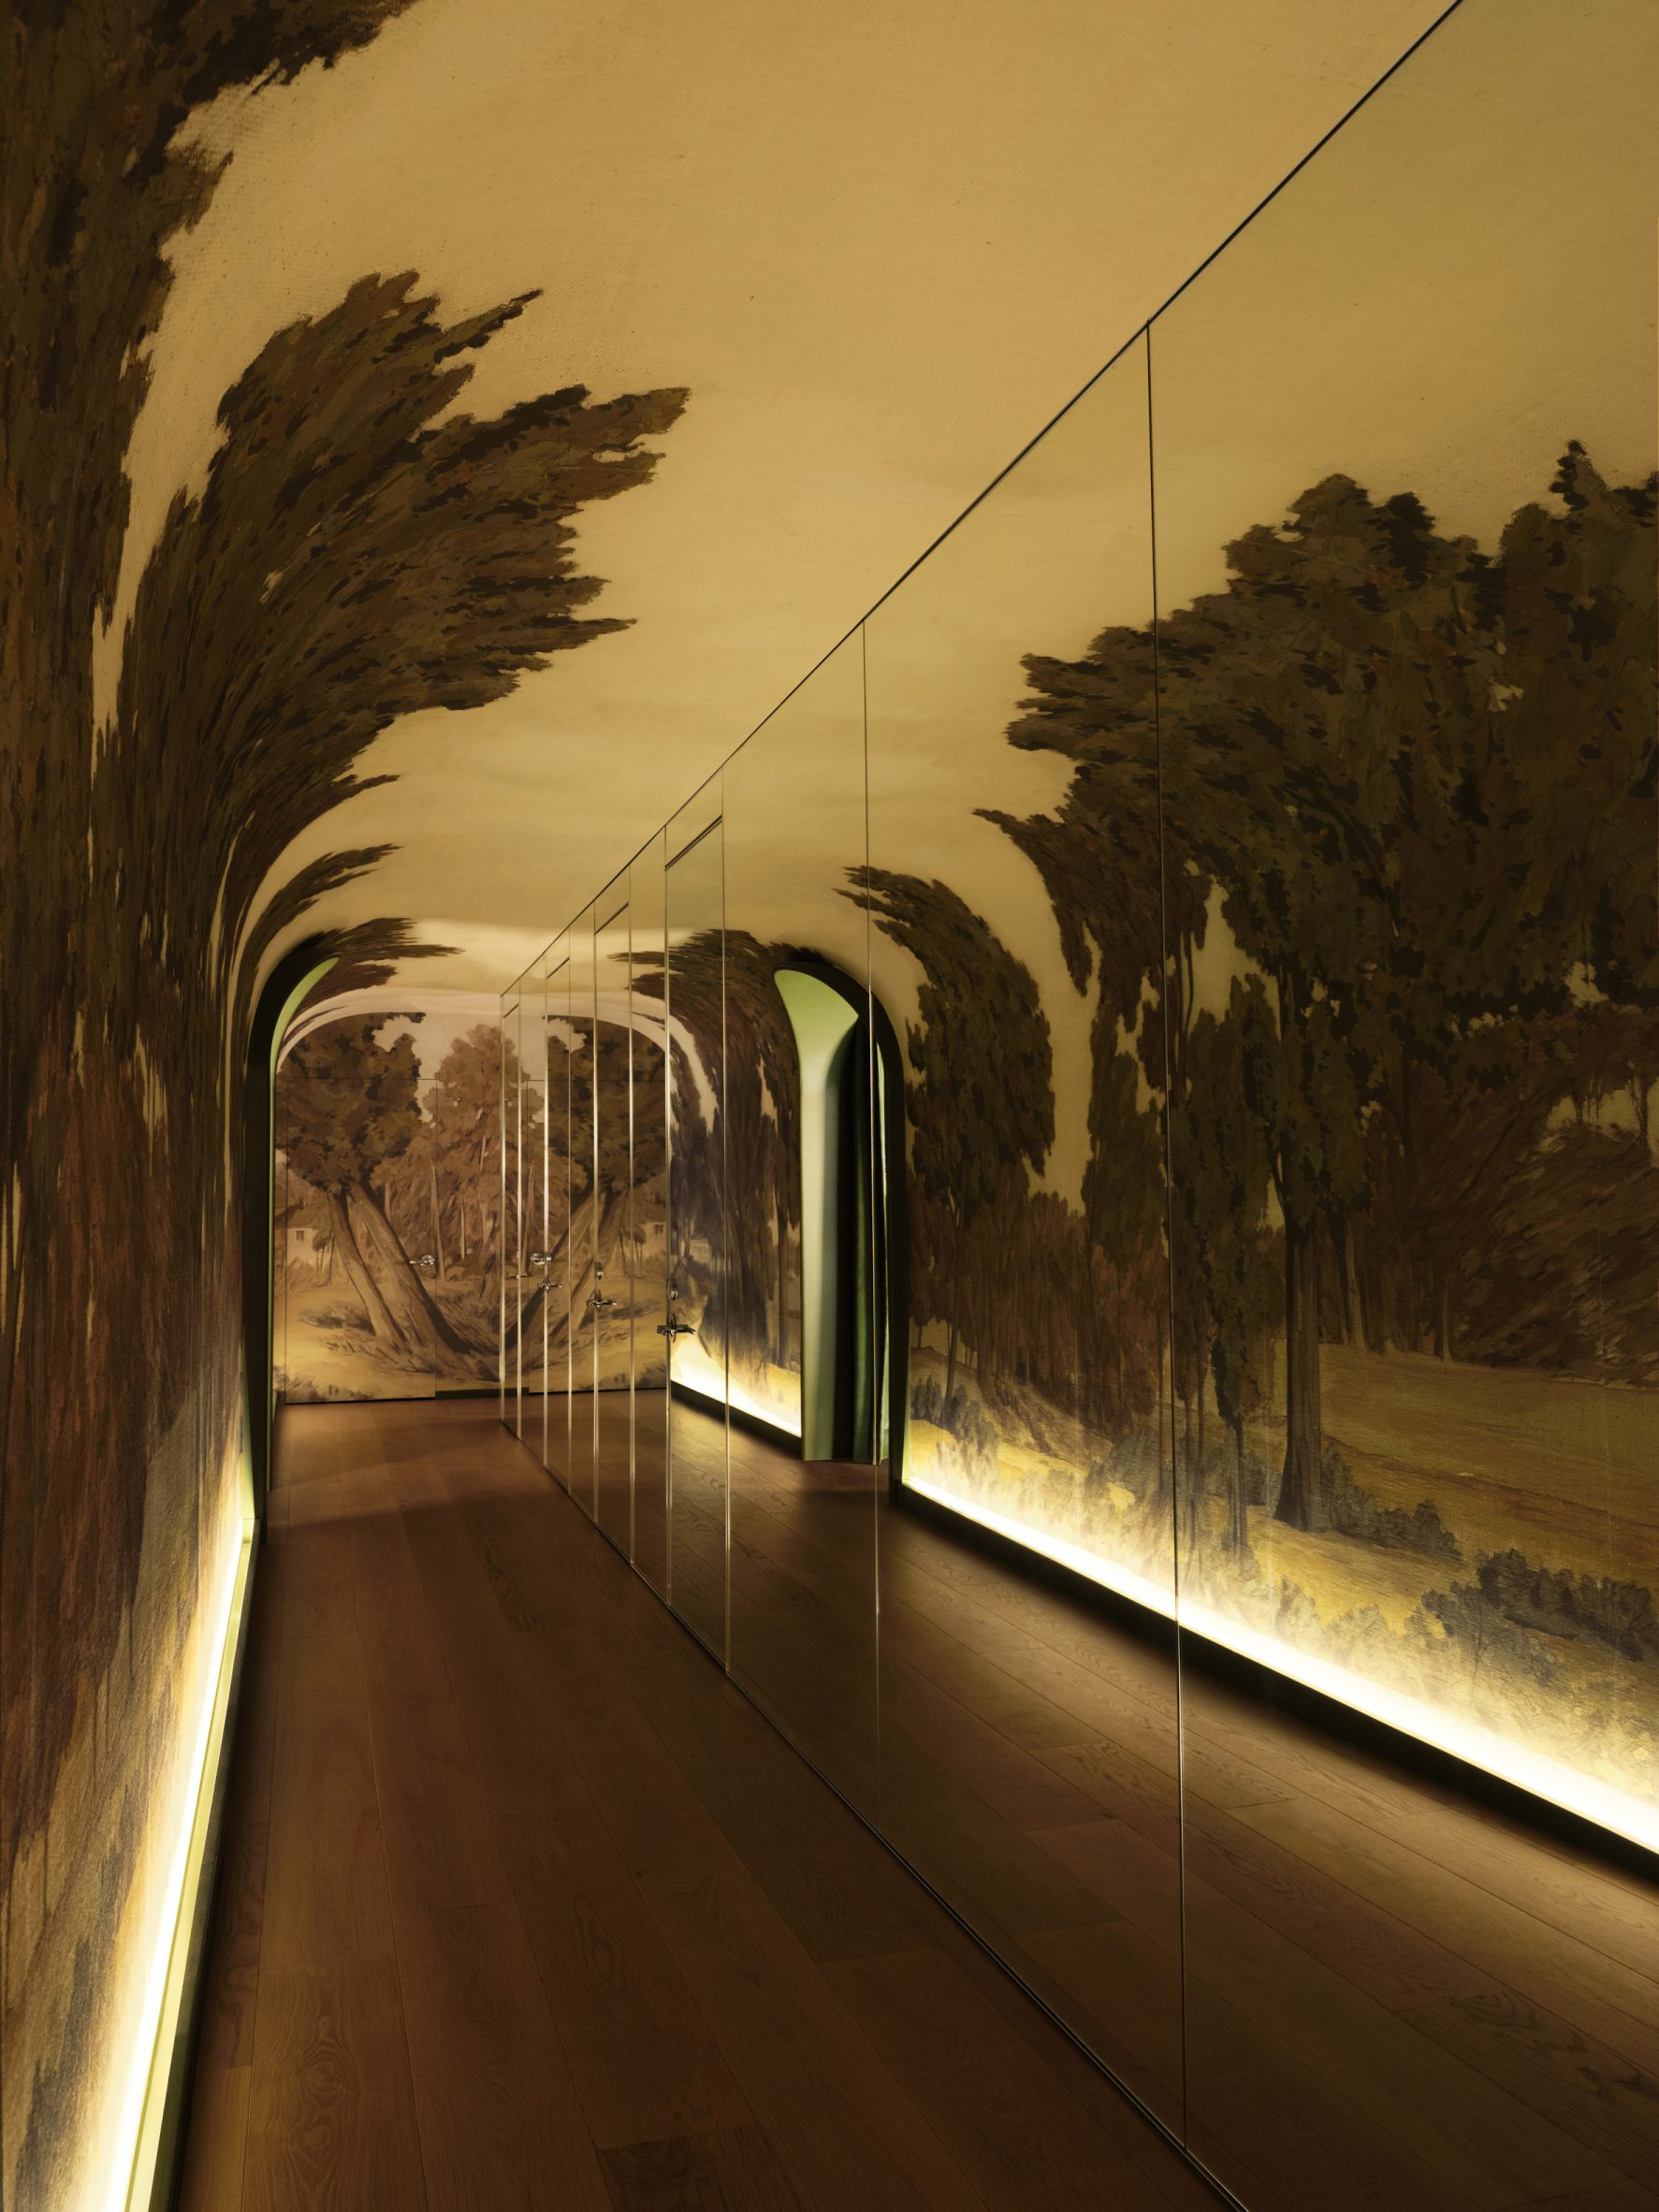 A mirrored corridor with a hand-painted landscape mural